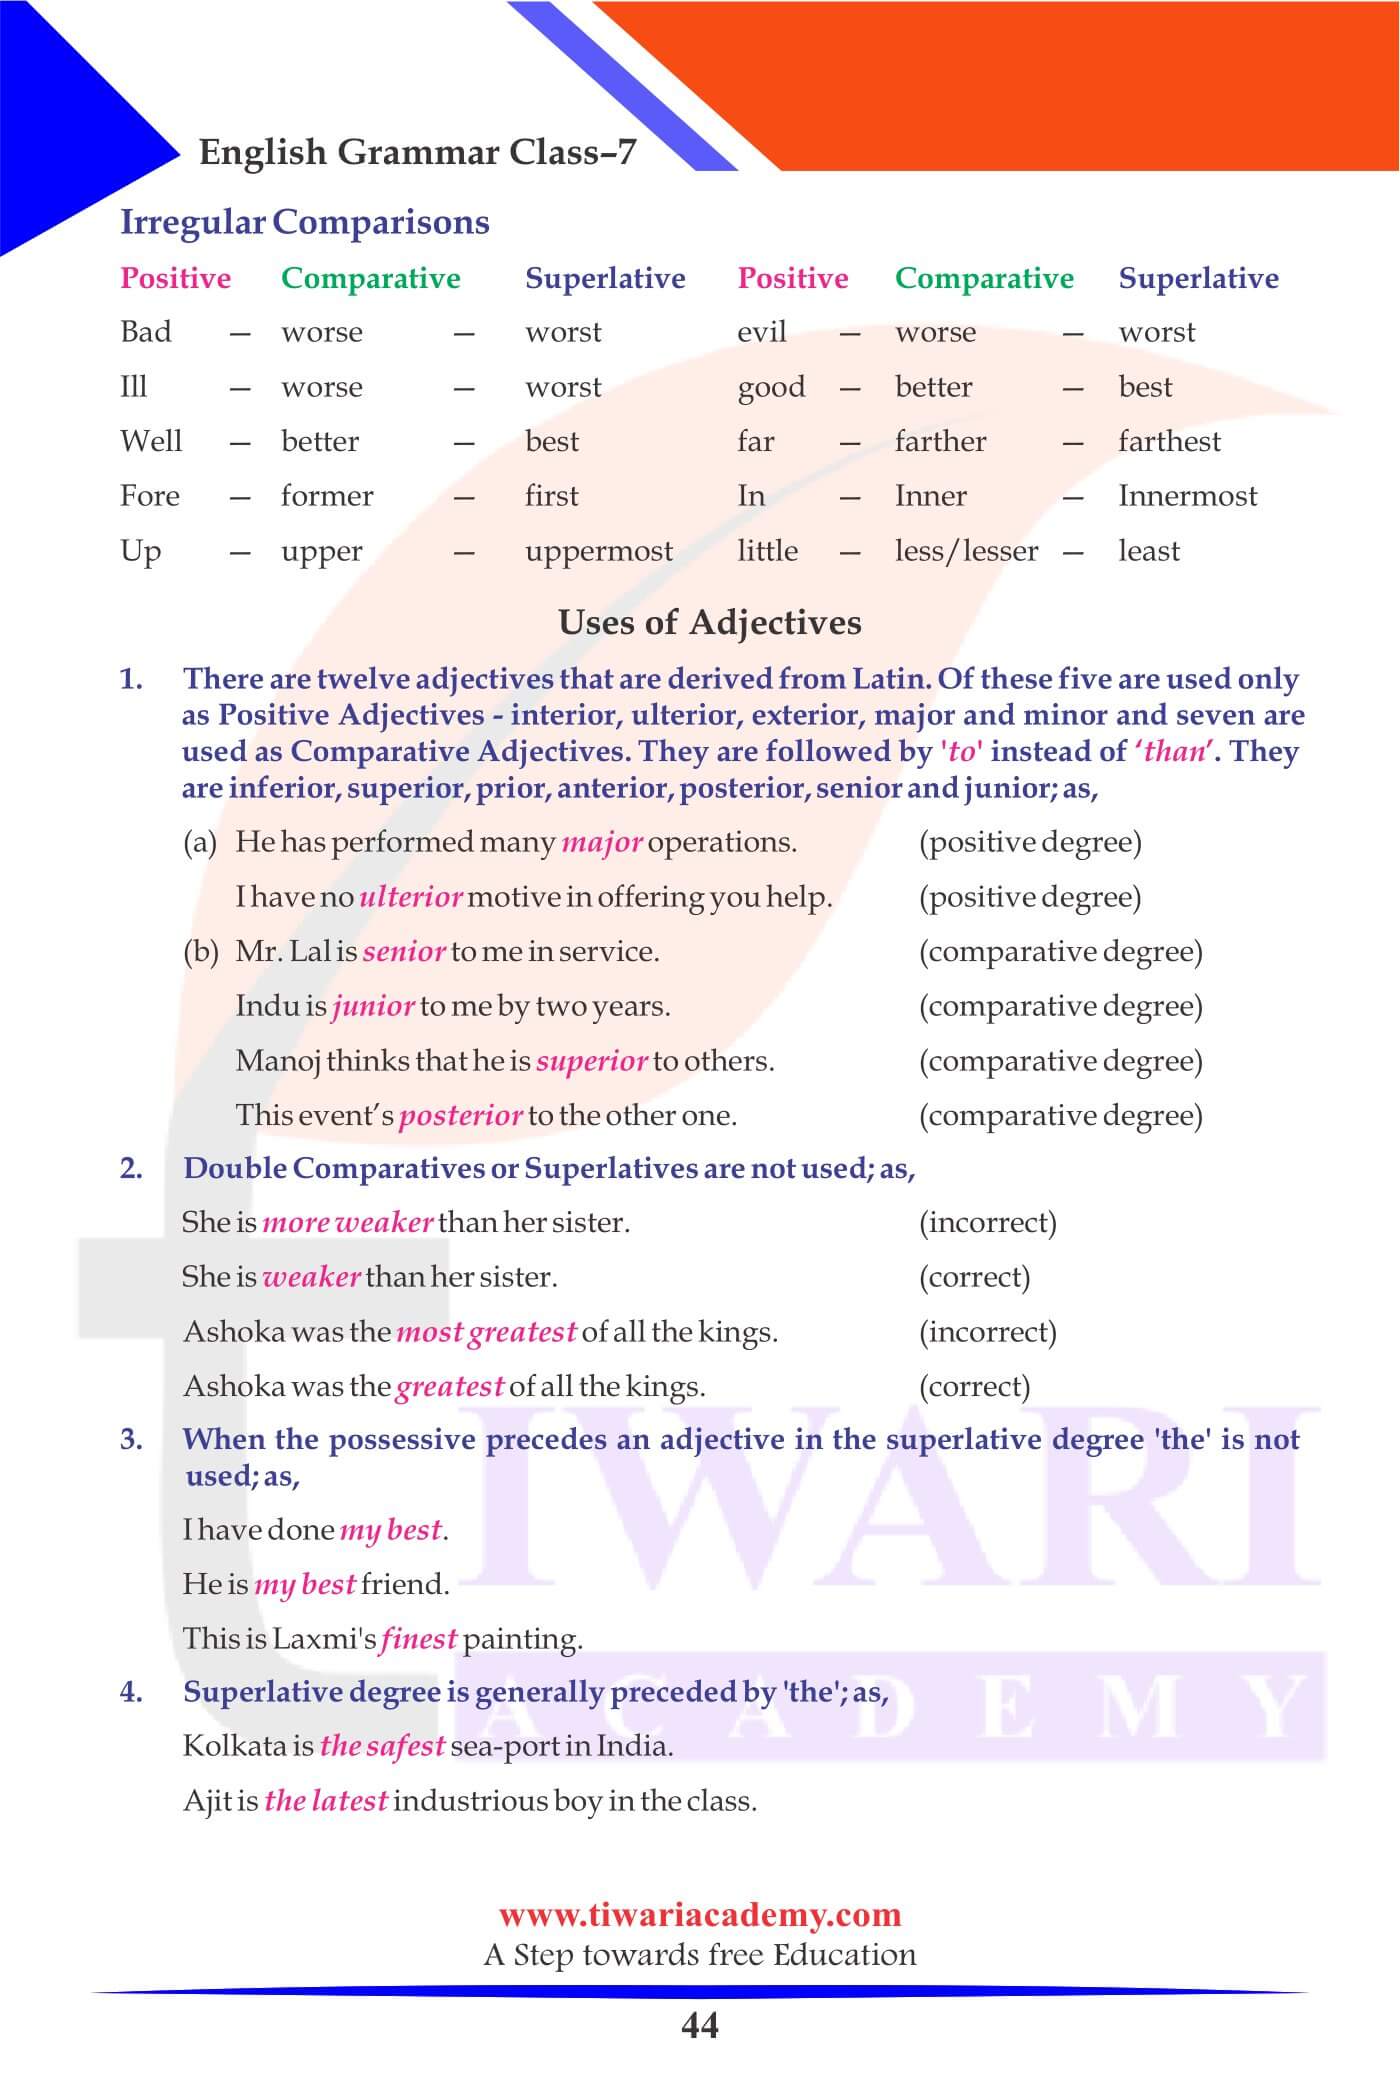 Class 7 Grammar Chapter 7 The Adjective exercises